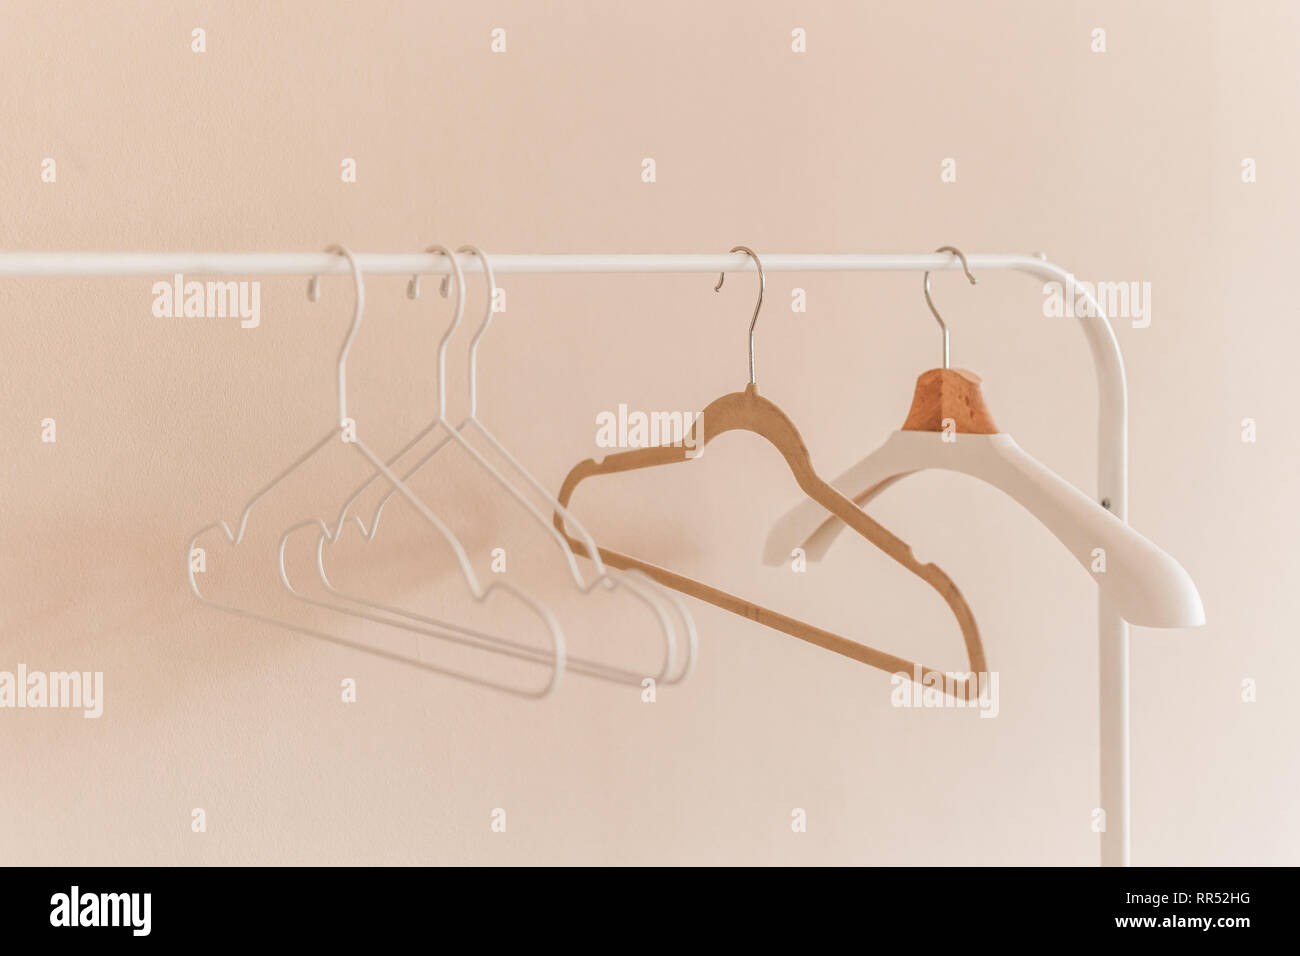 wooden coat hangers on clothes rail. Stock Photo